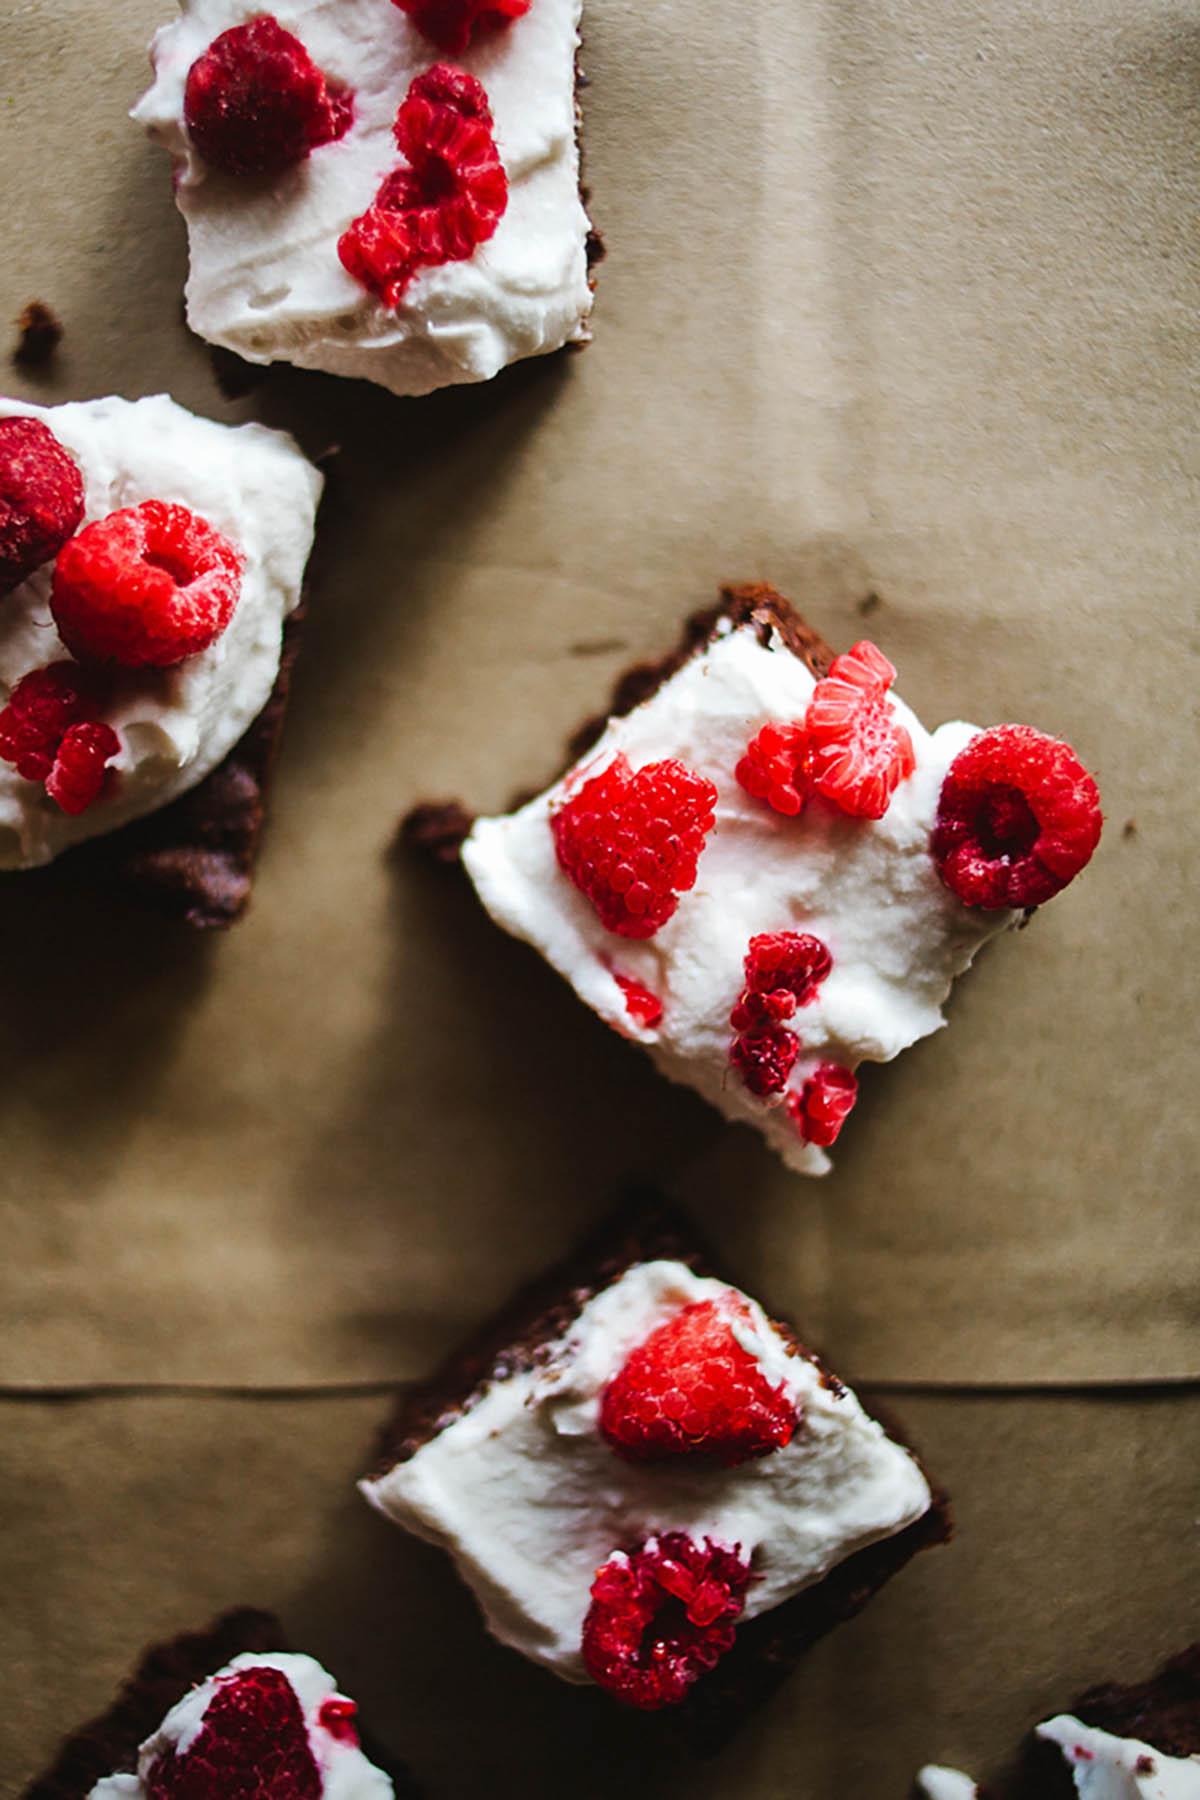 Small brownies topped with cream and raspberries.